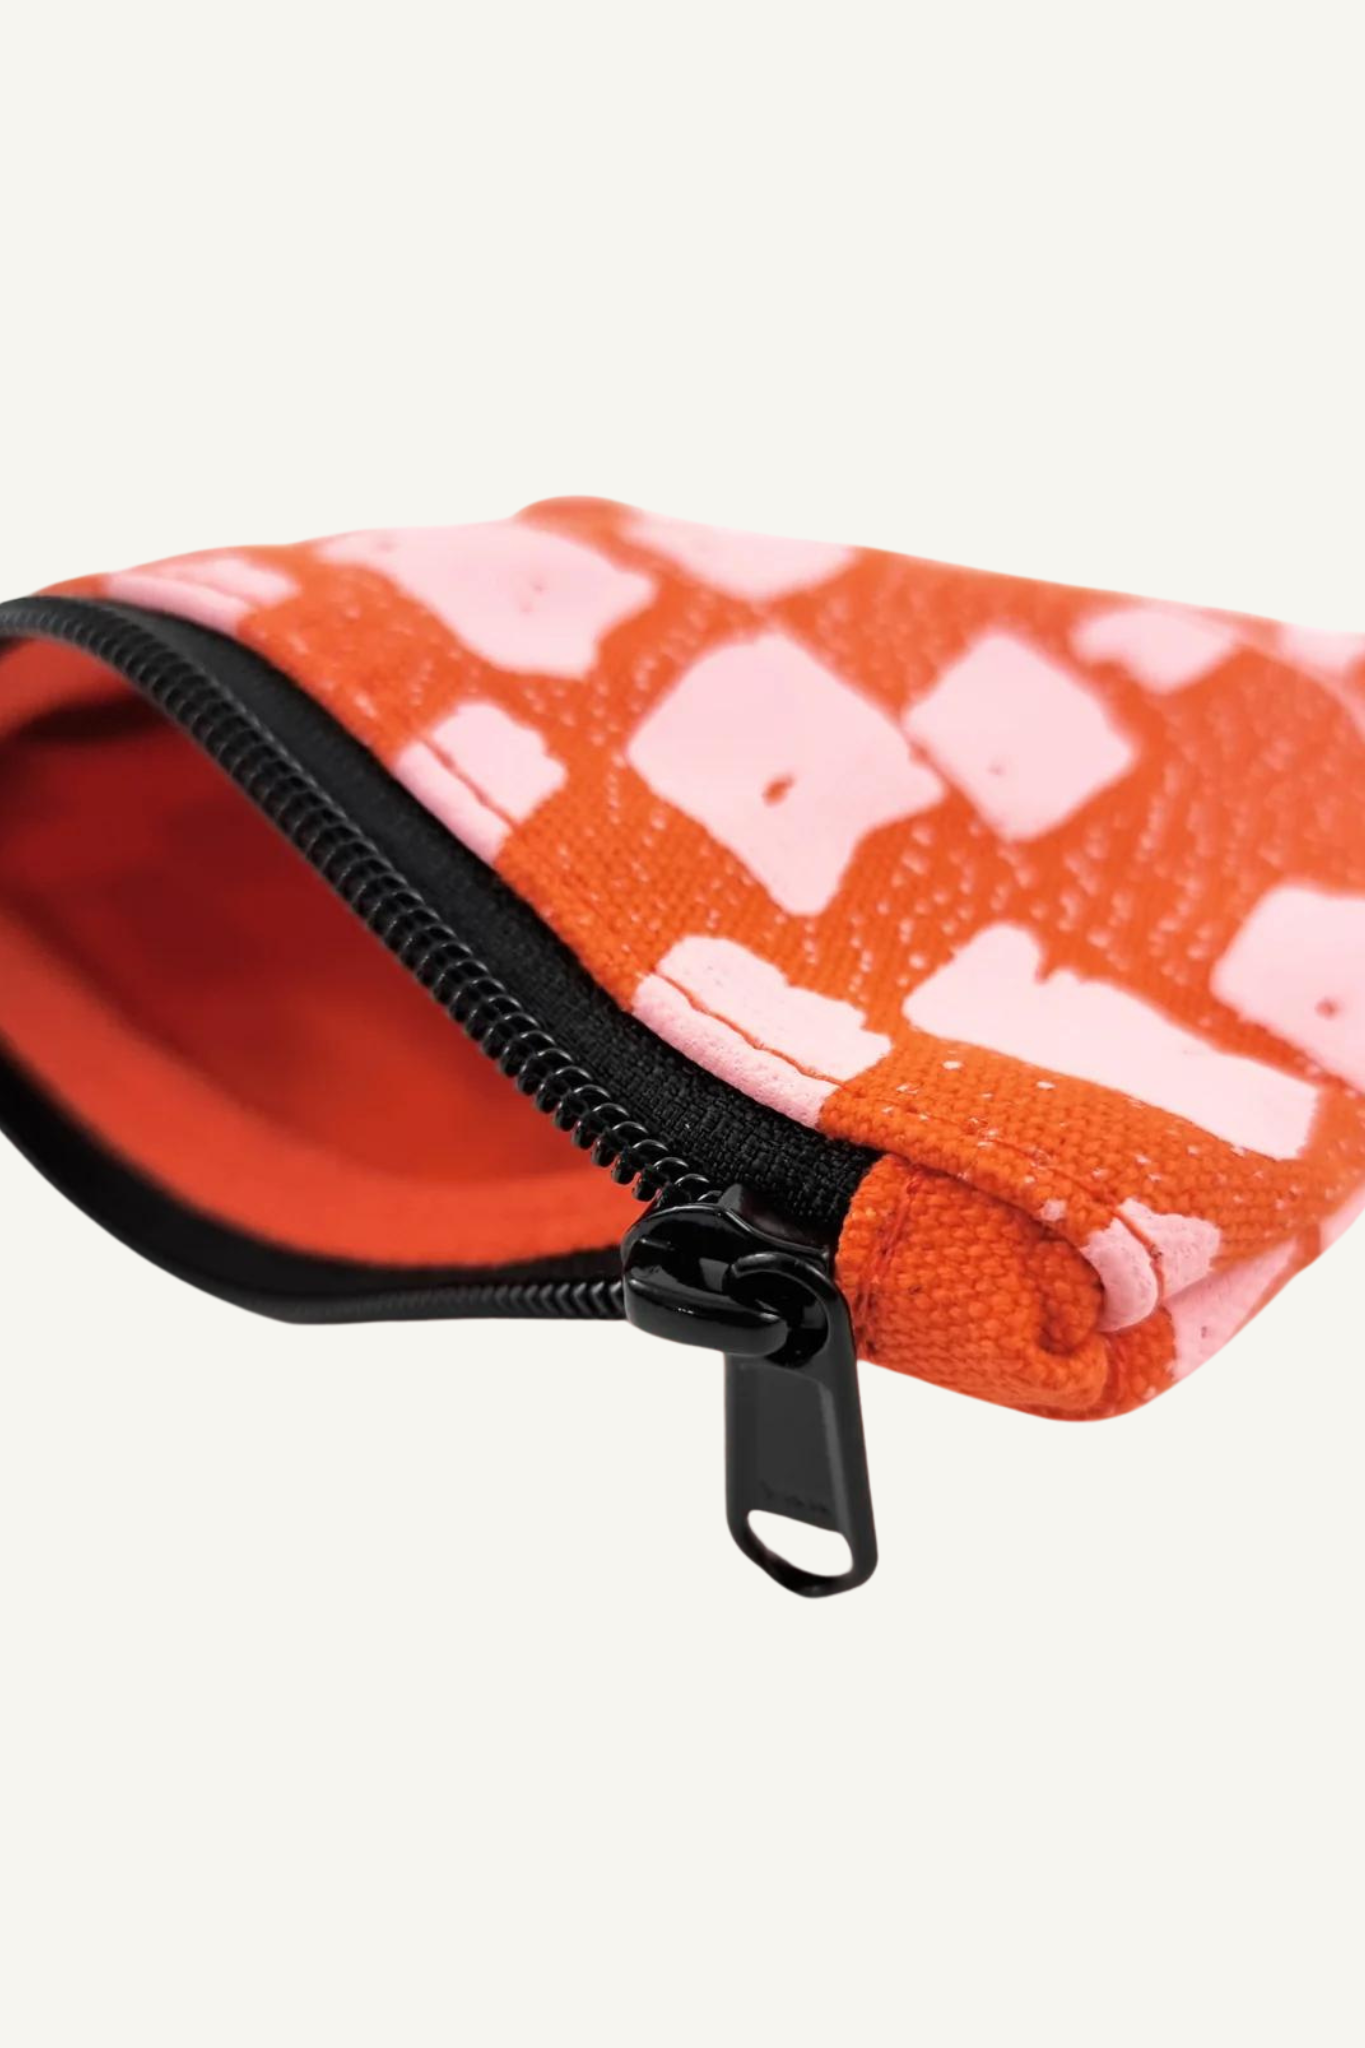 Zip Pouch by Margaret Smith (Flame Red)